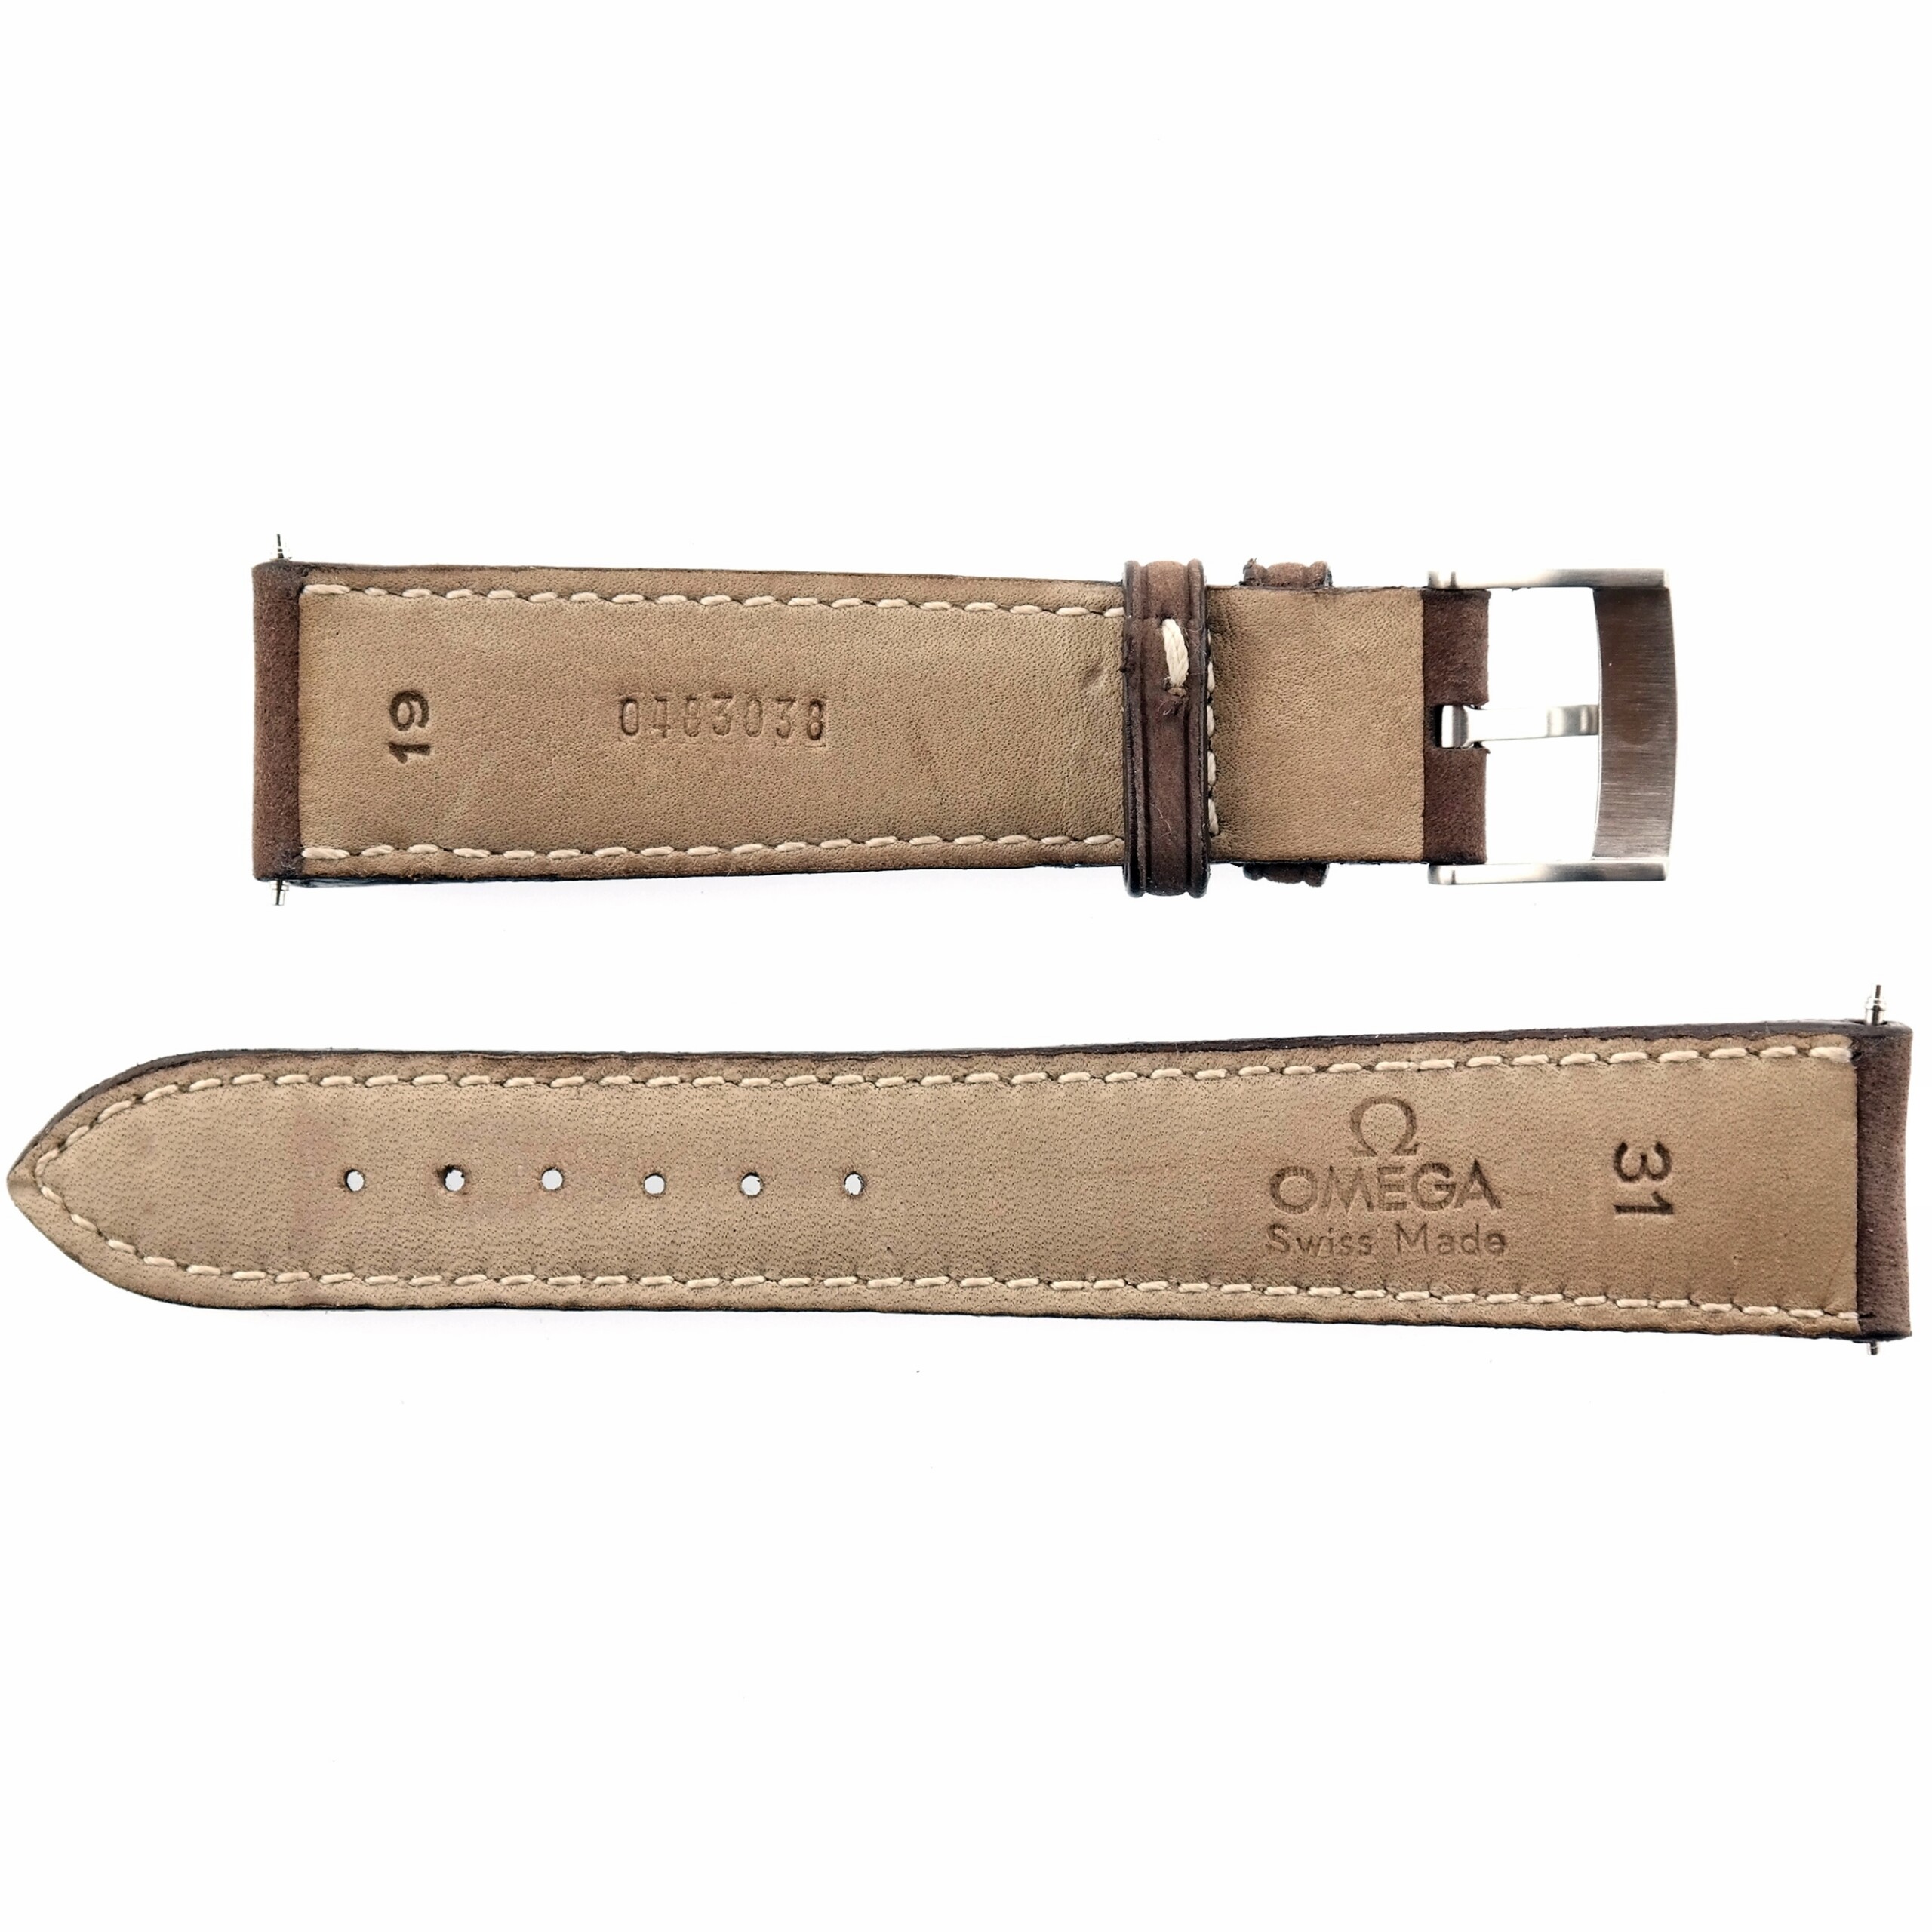 Authentic OMEGA - 0483038 - 19 mm Nubuck Leather Watch Strap